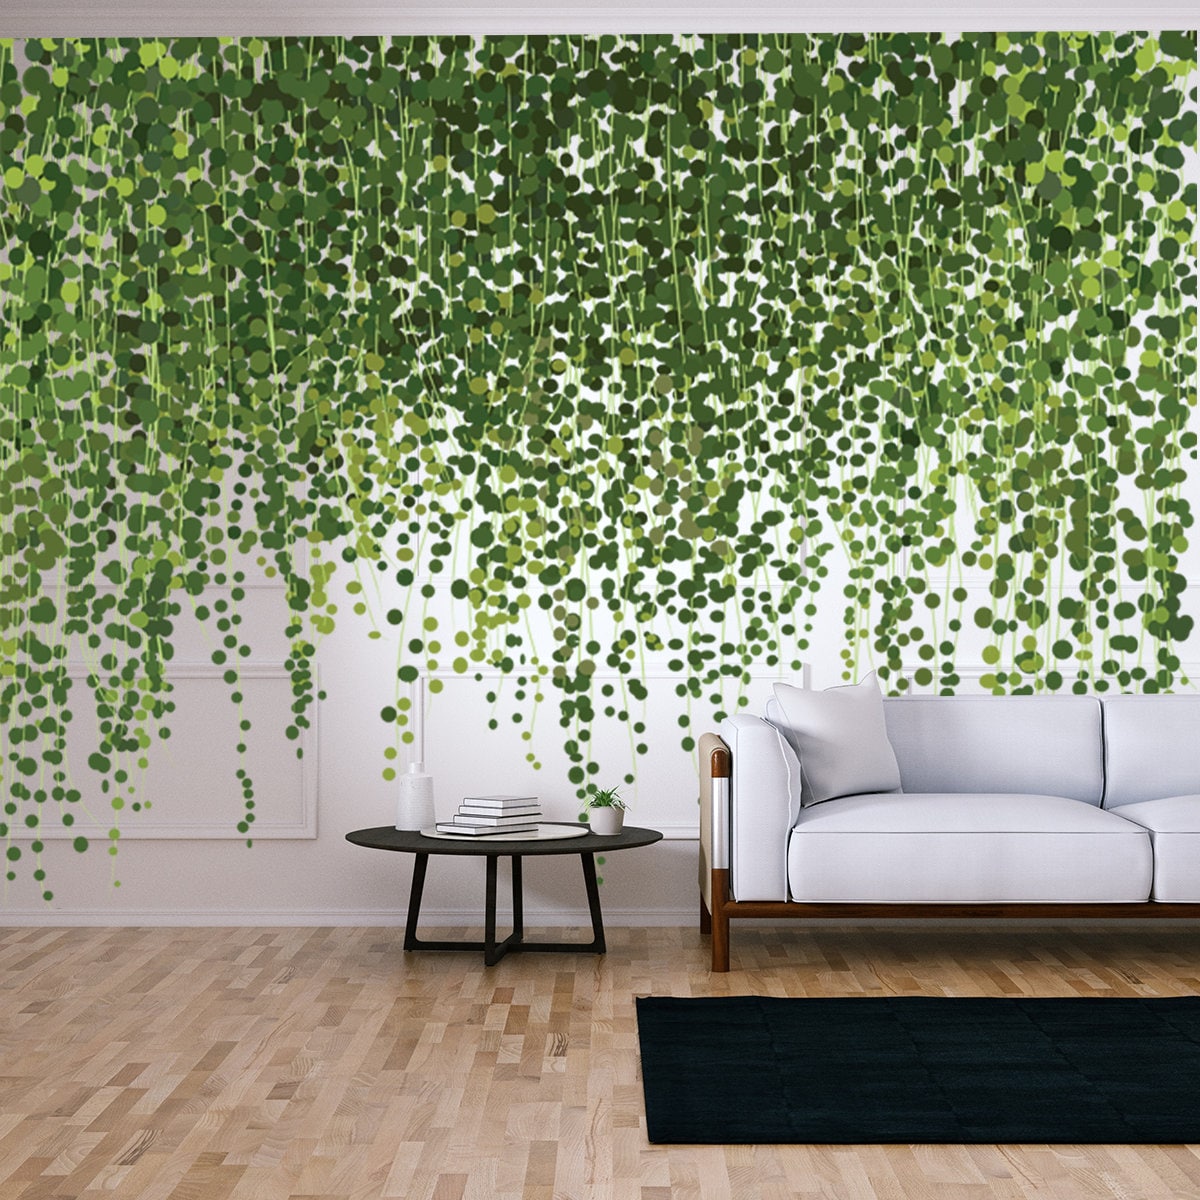 Ivy Wall Mural - Etsy